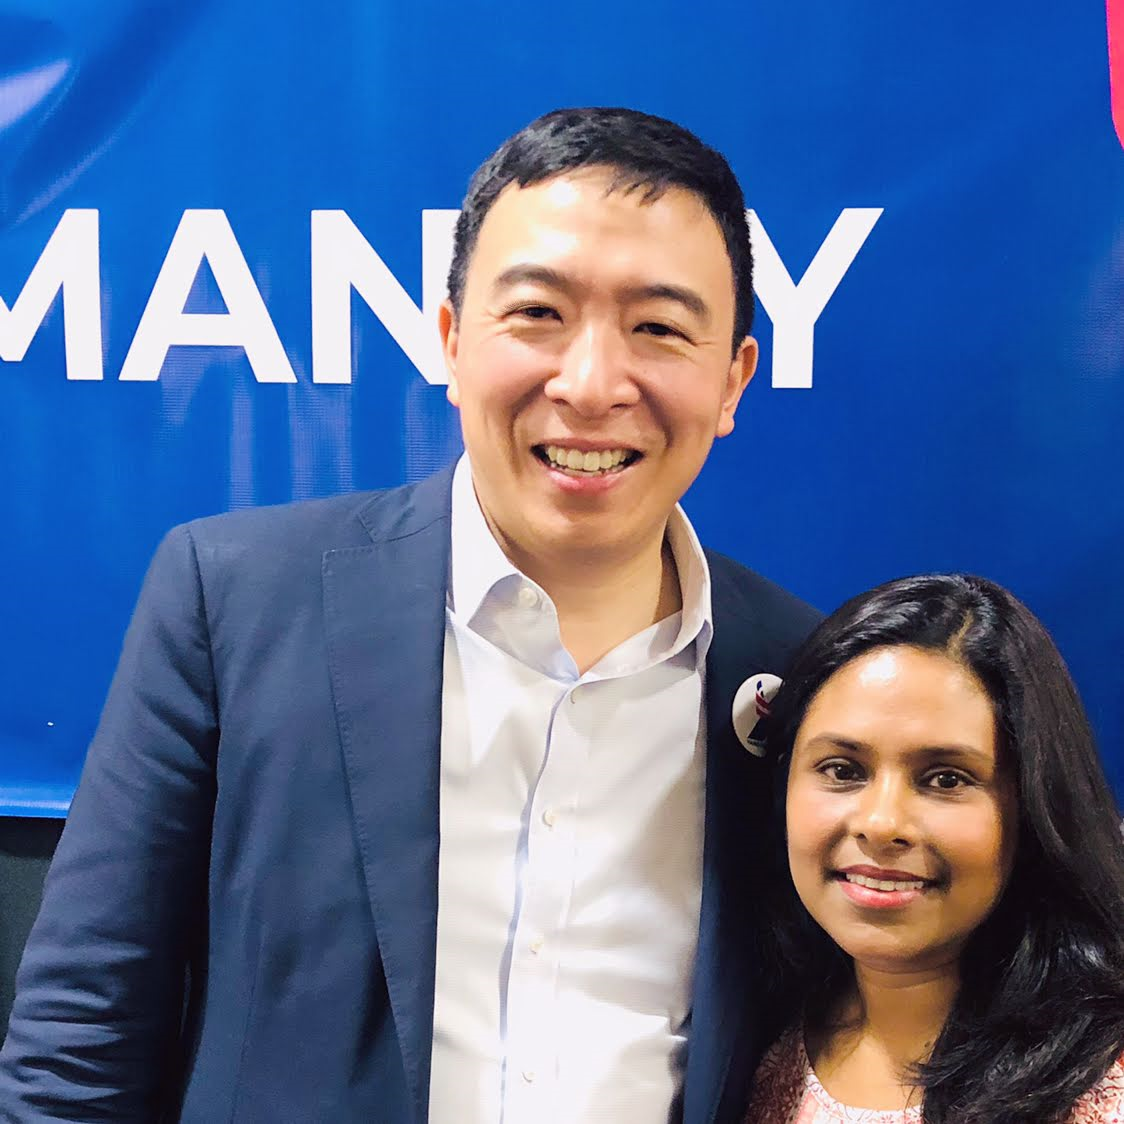 Photo of Andrew Yang and Donna Imam.